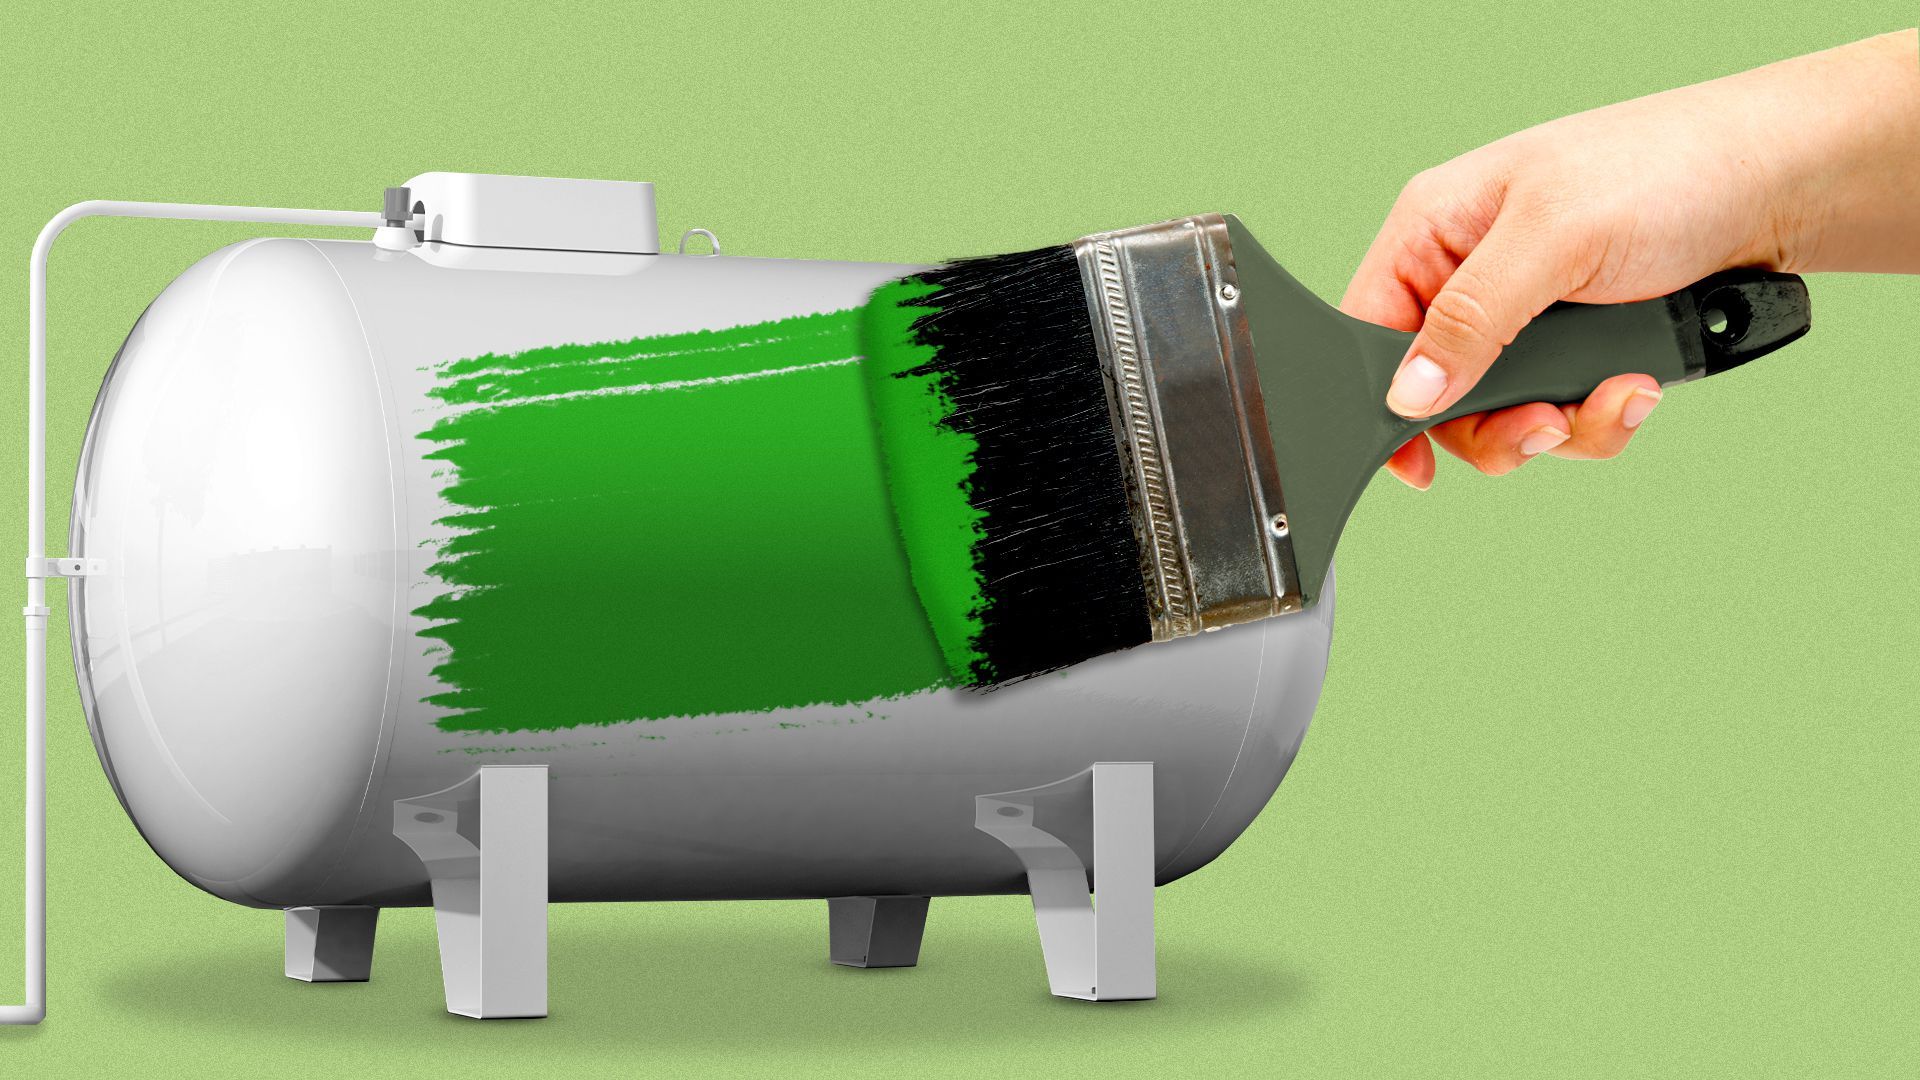 Illustration of a hand painting a gas tank green.